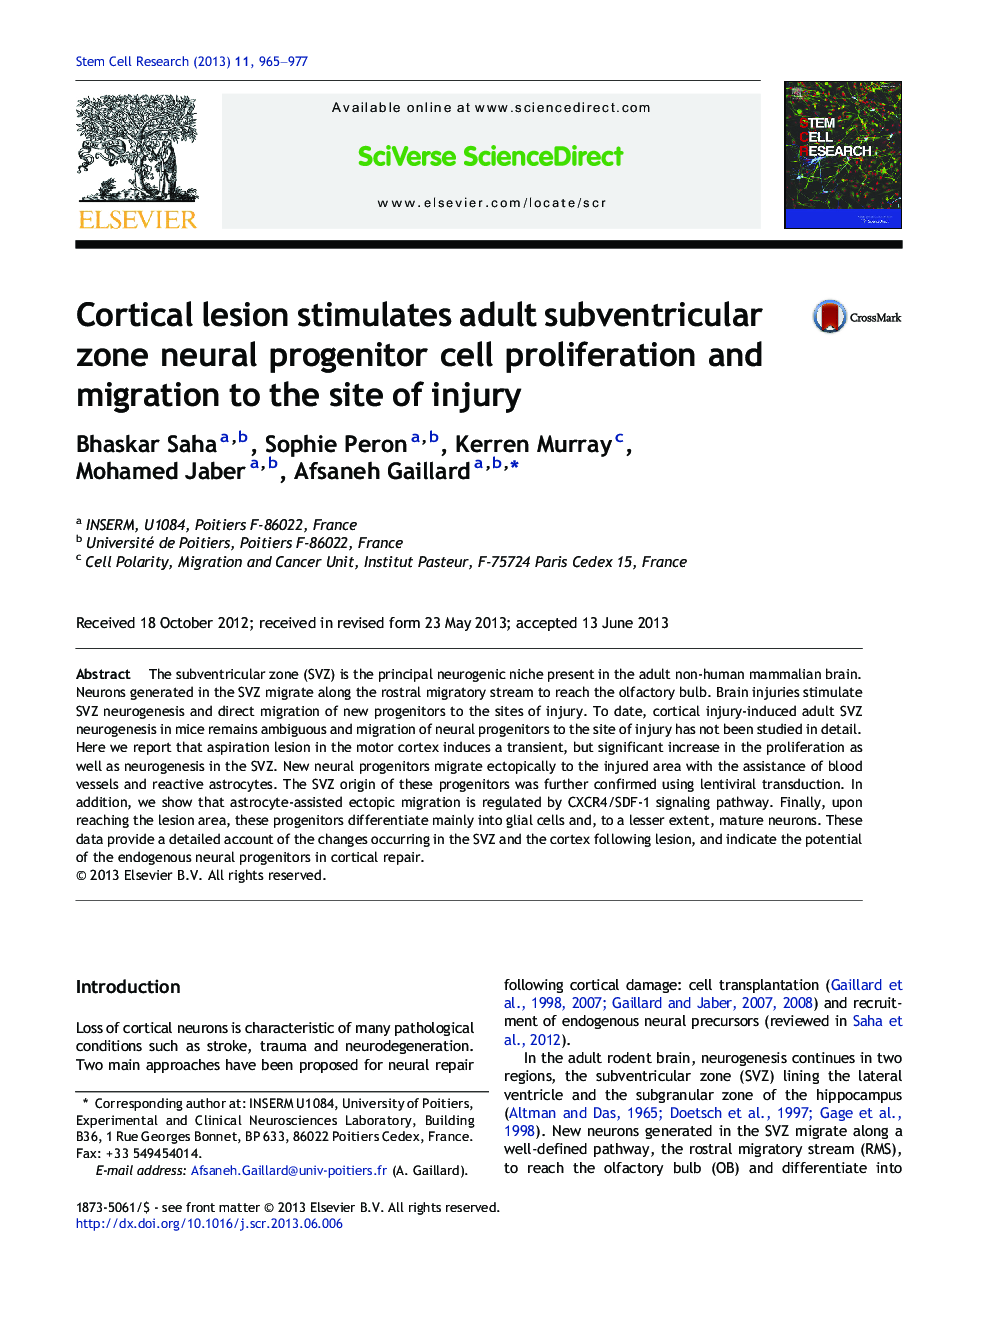 Cortical lesion stimulates adult subventricular zone neural progenitor cell proliferation and migration to the site of injury